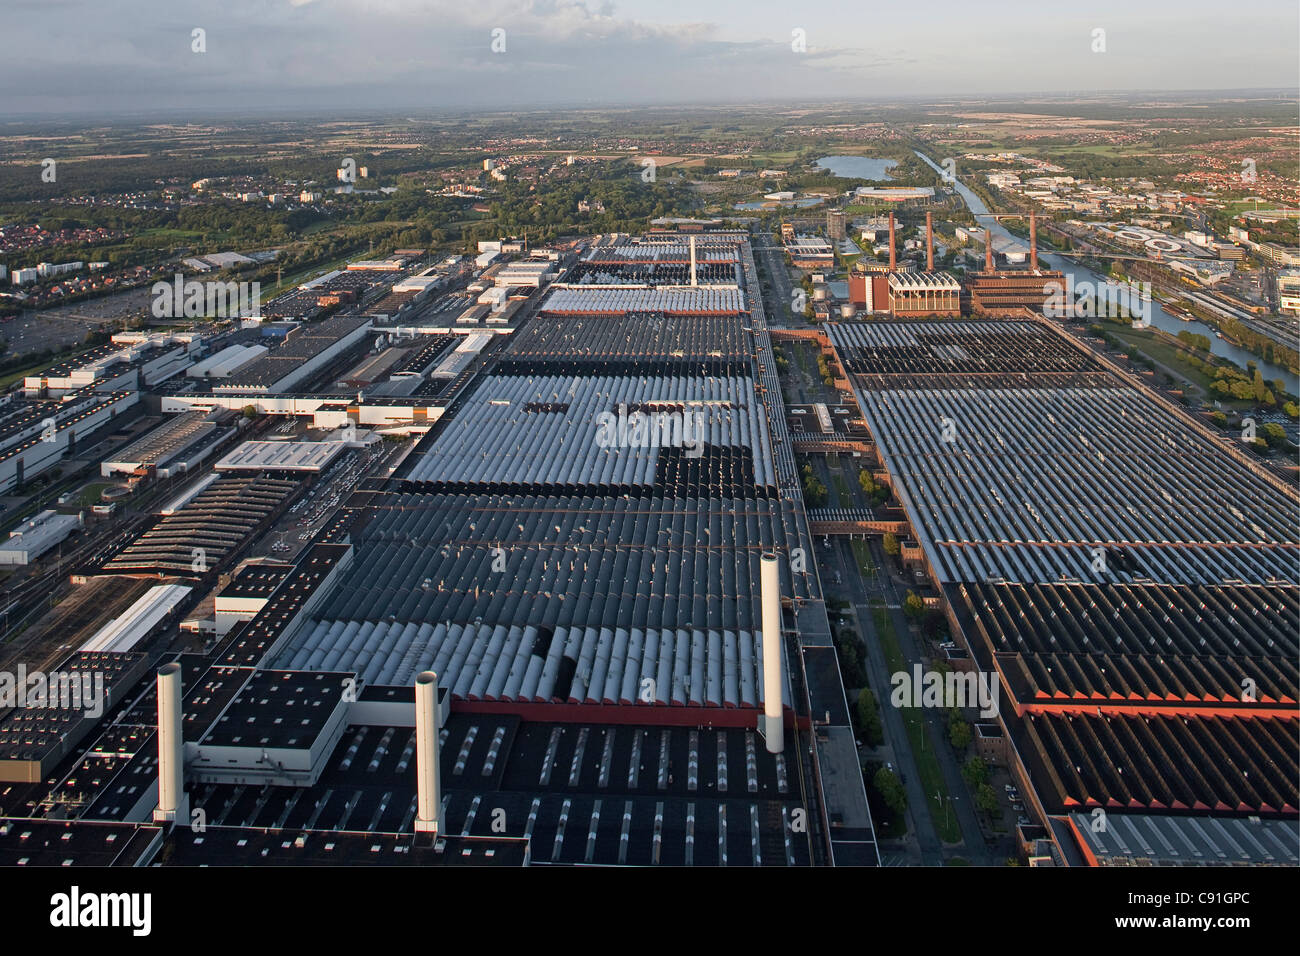 Aerial view of the Volkswagen plant with factory halls and canal, Wolfsburg, Lower Saxony, Germany Stock Photo